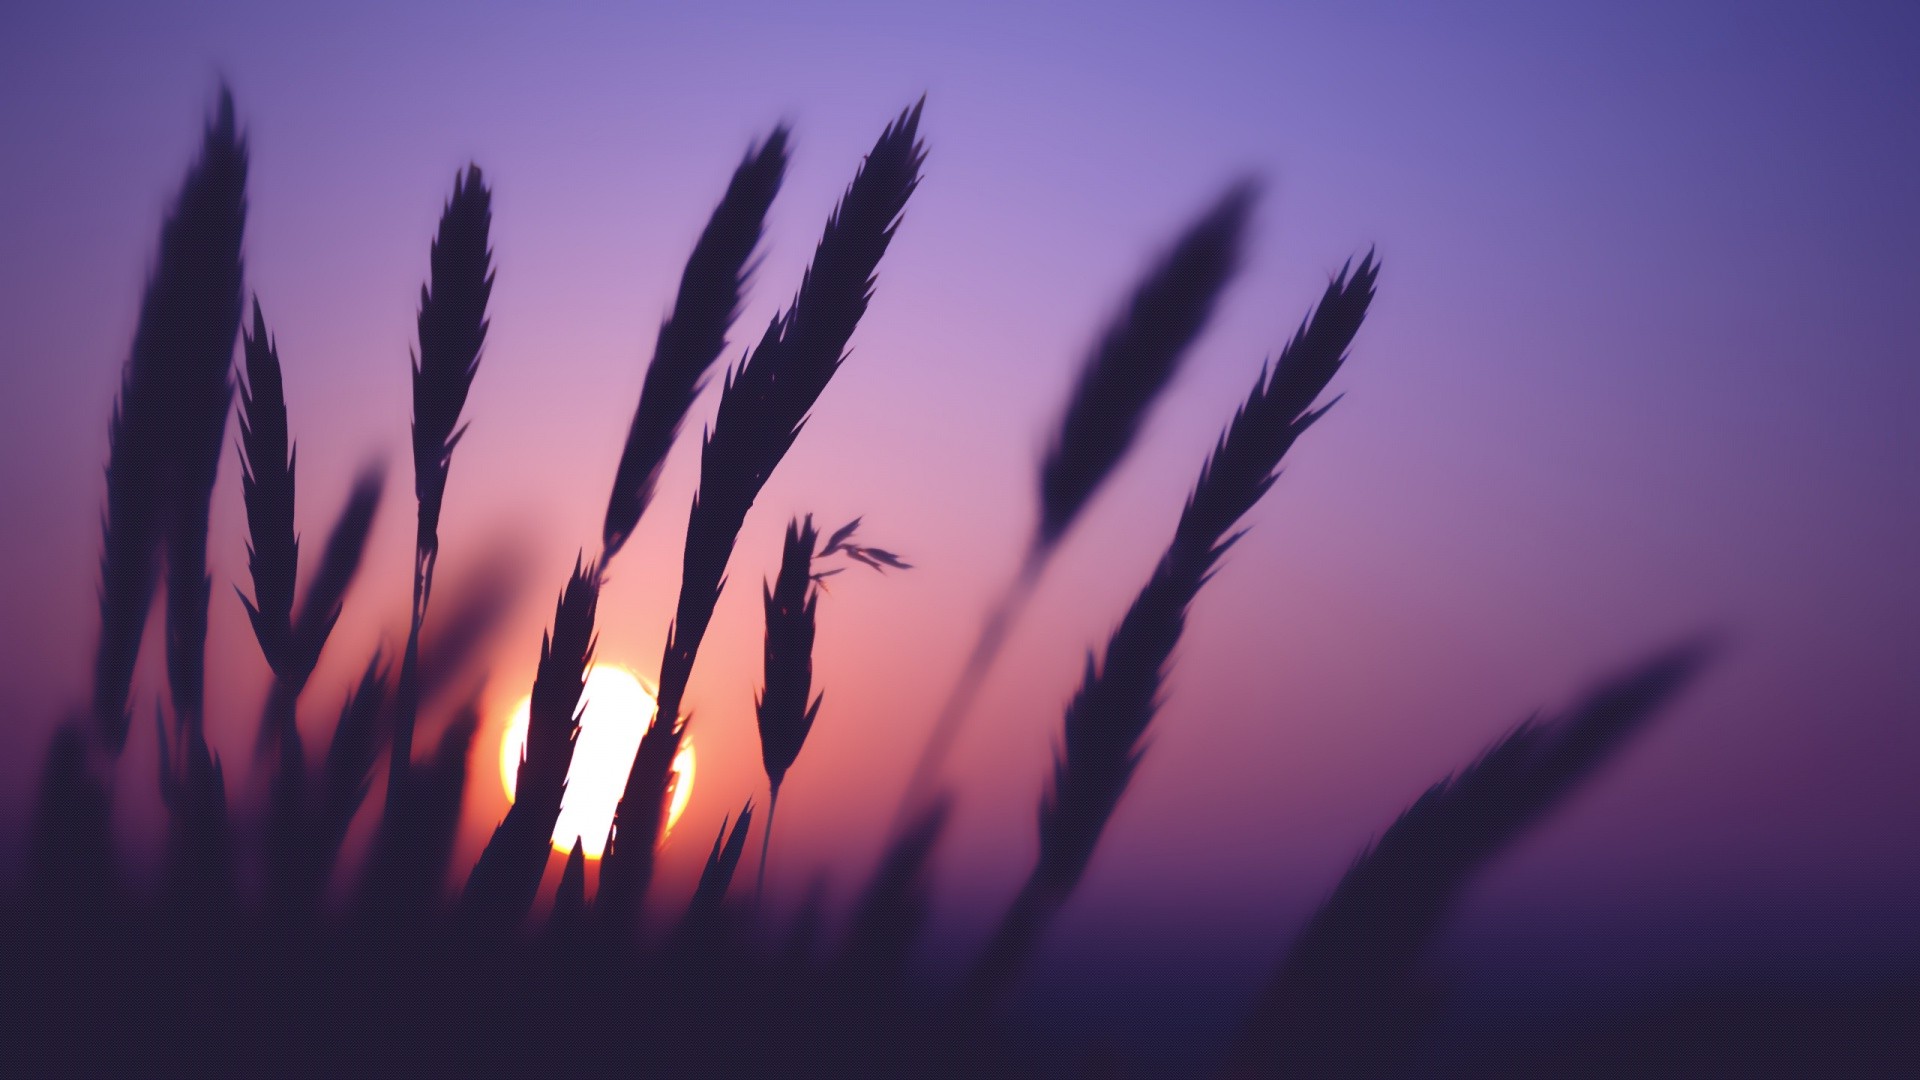 spikelets, Sunset, Nature, Silhouette Wallpaper